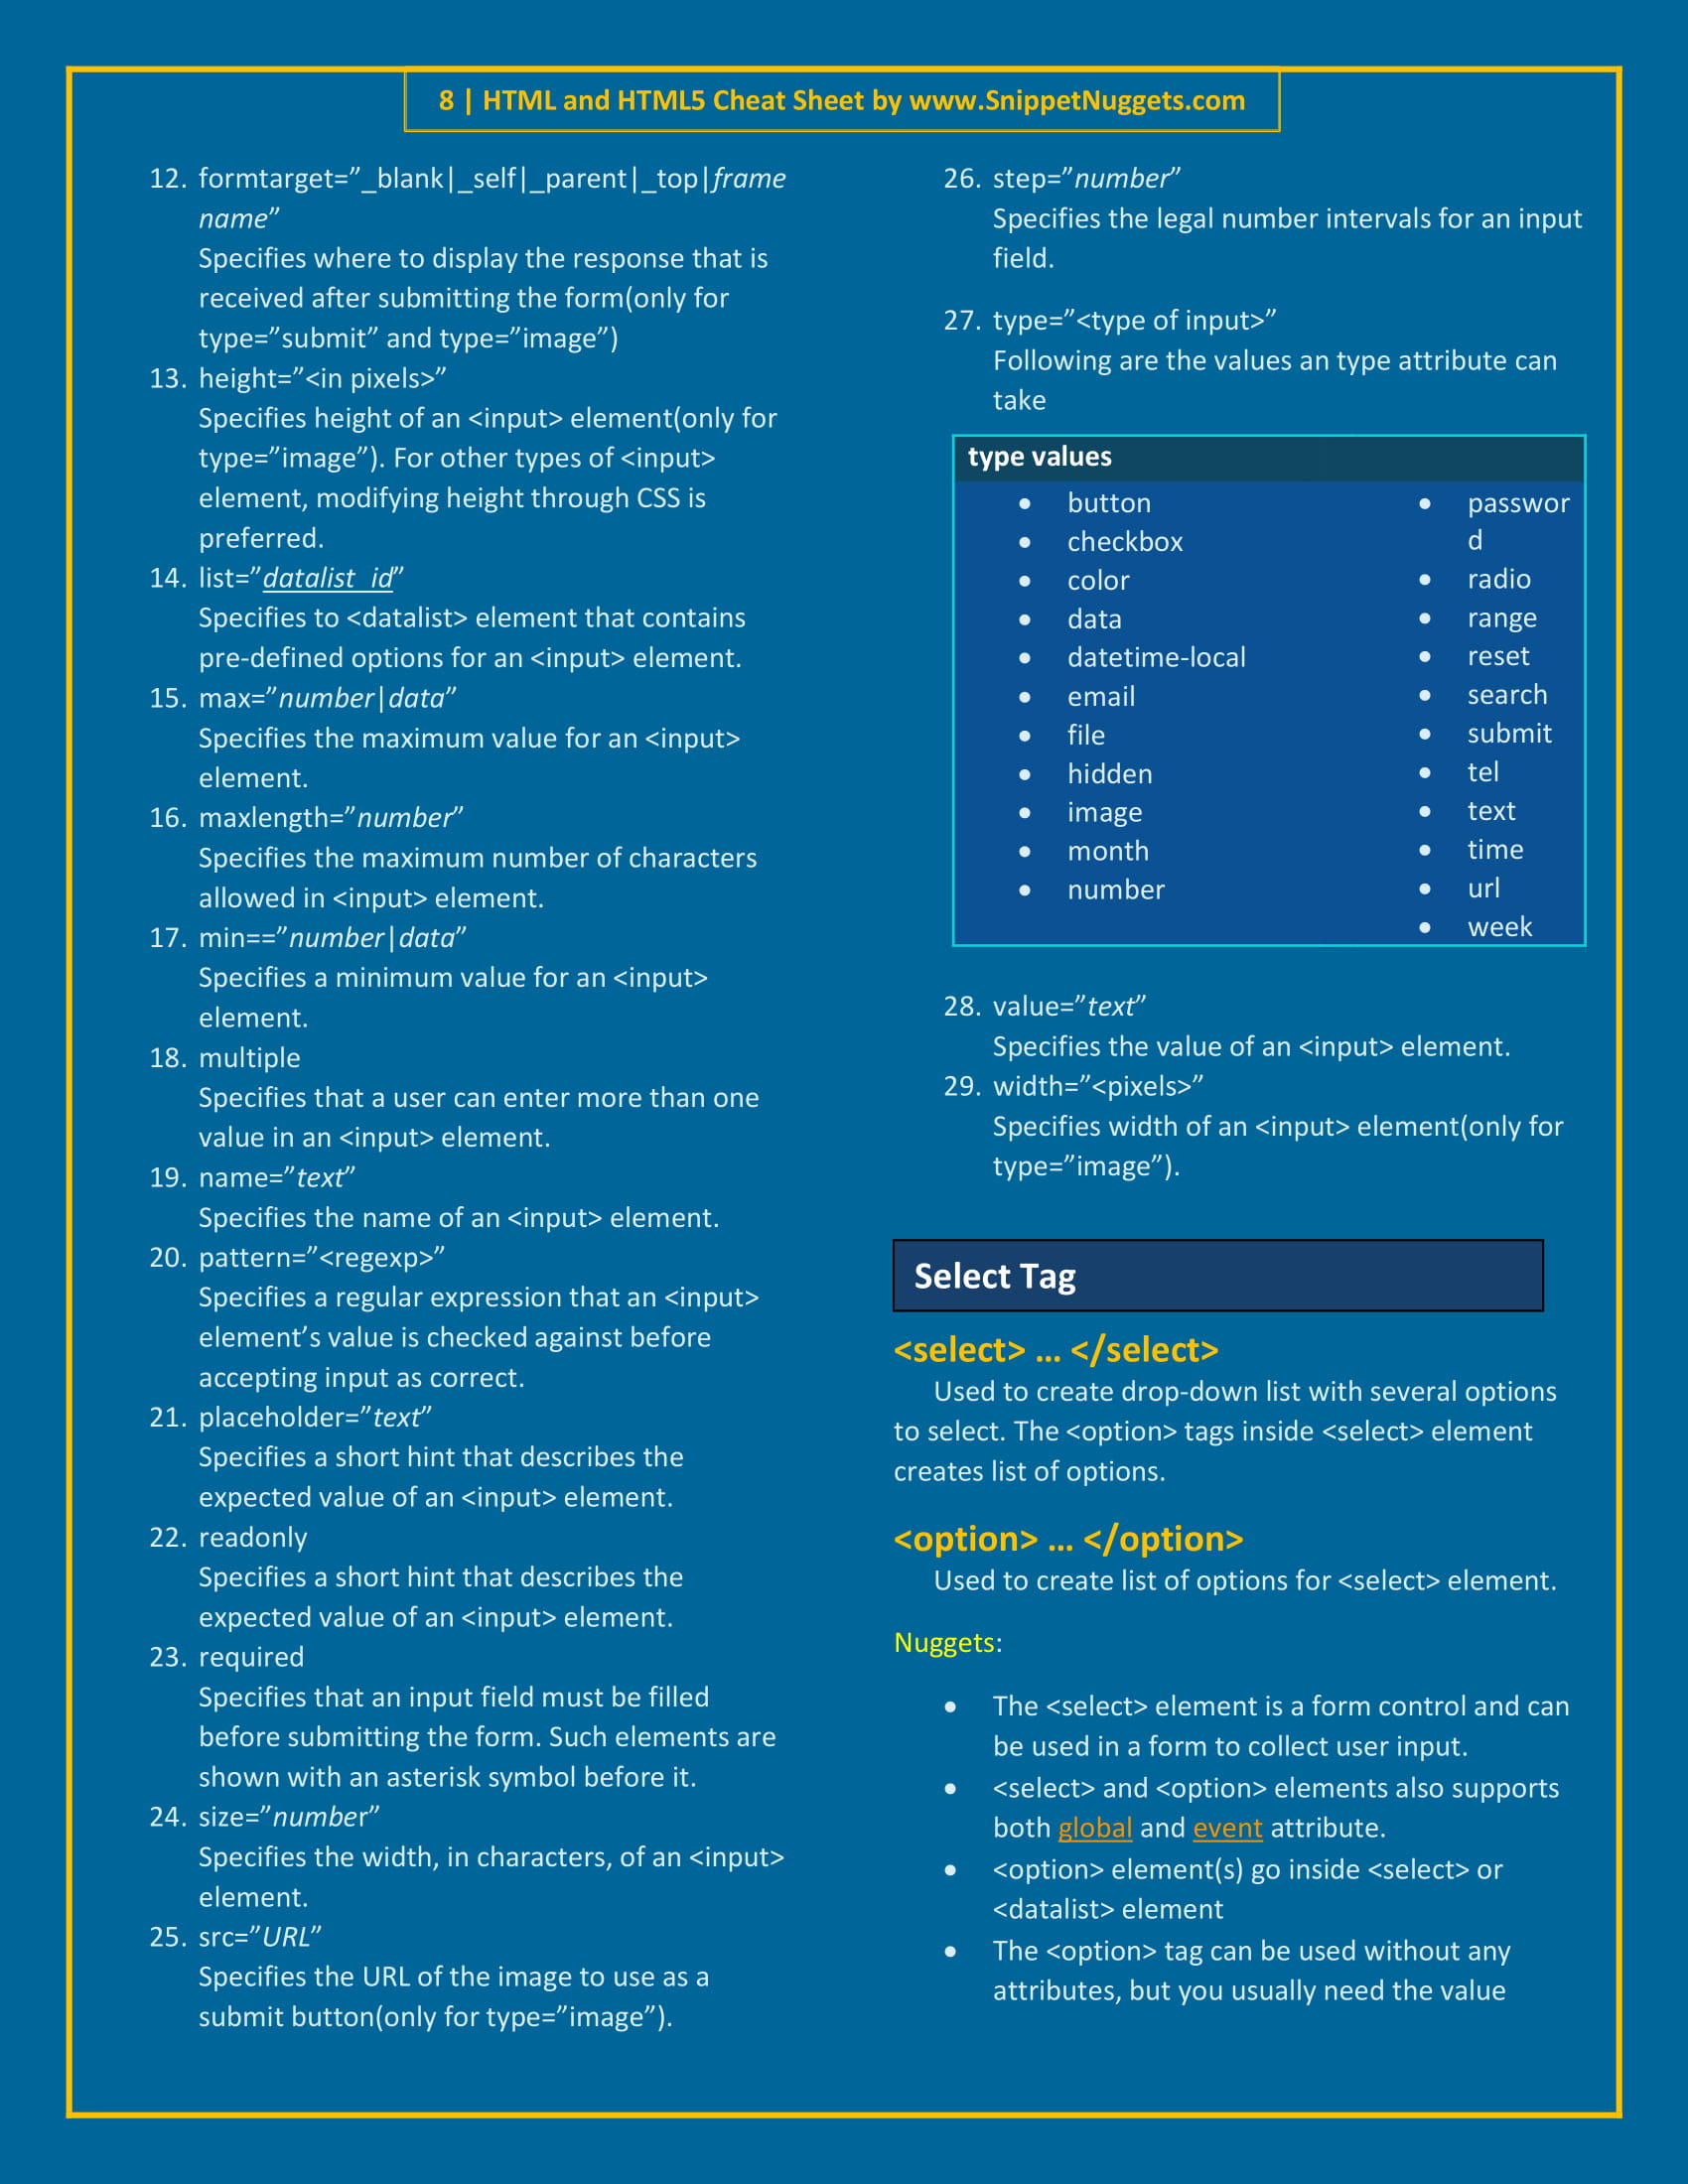 html cheat sheet for 2019 input tag attributes types select option  www.snippetnuggets.com